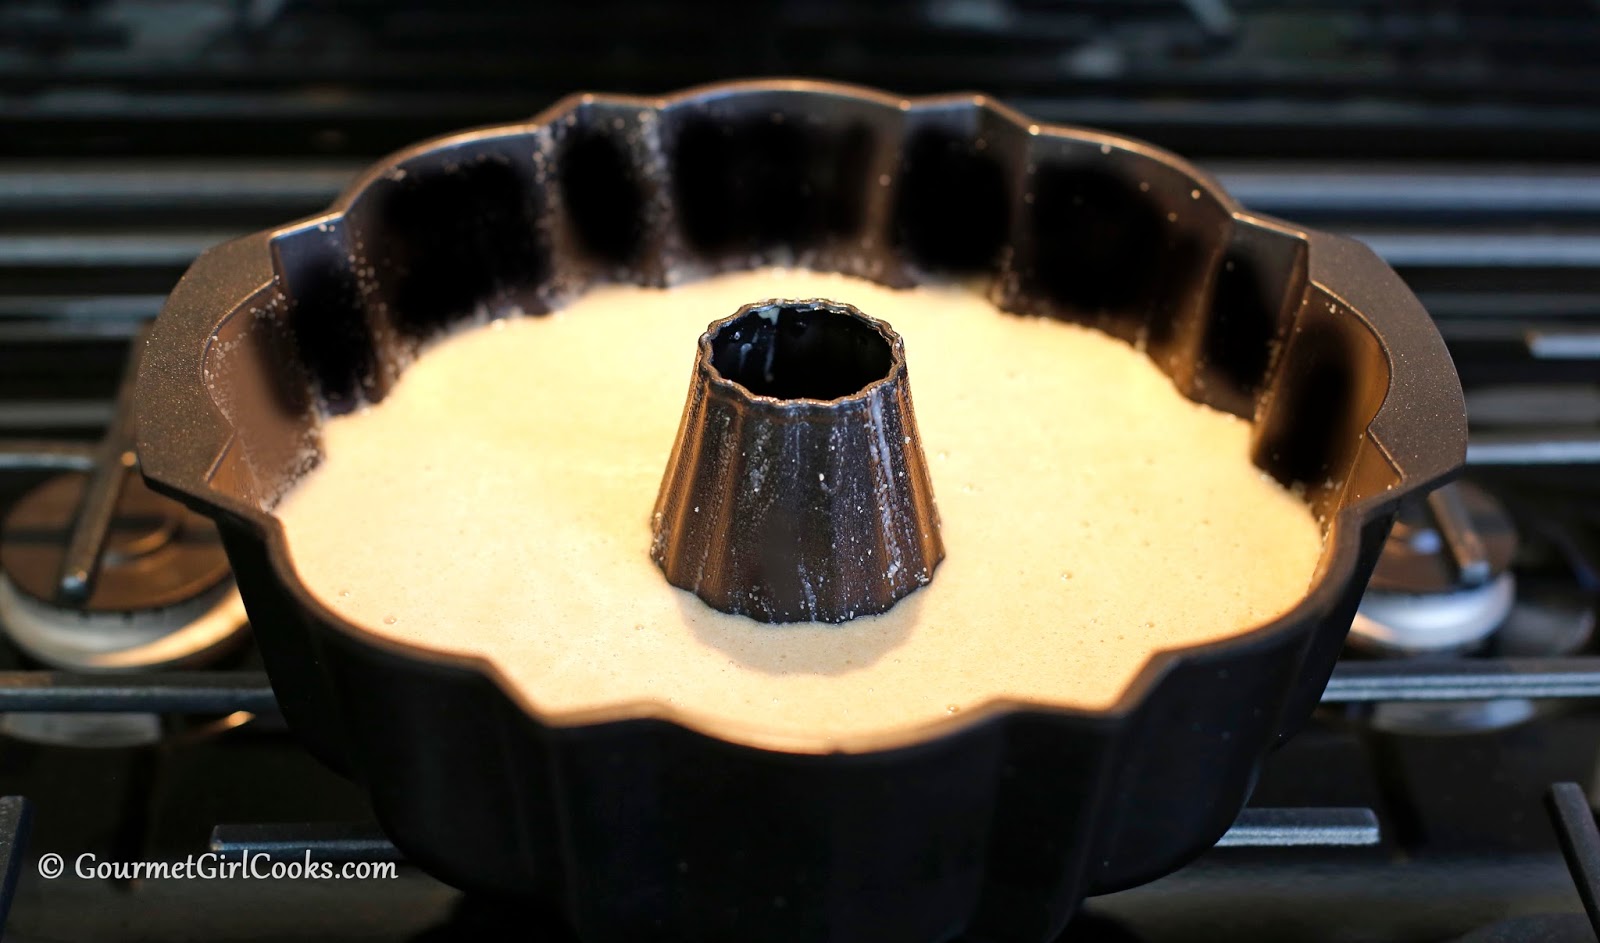 Comparing the new Lodge bundt (fluted cake) pan to a vintage